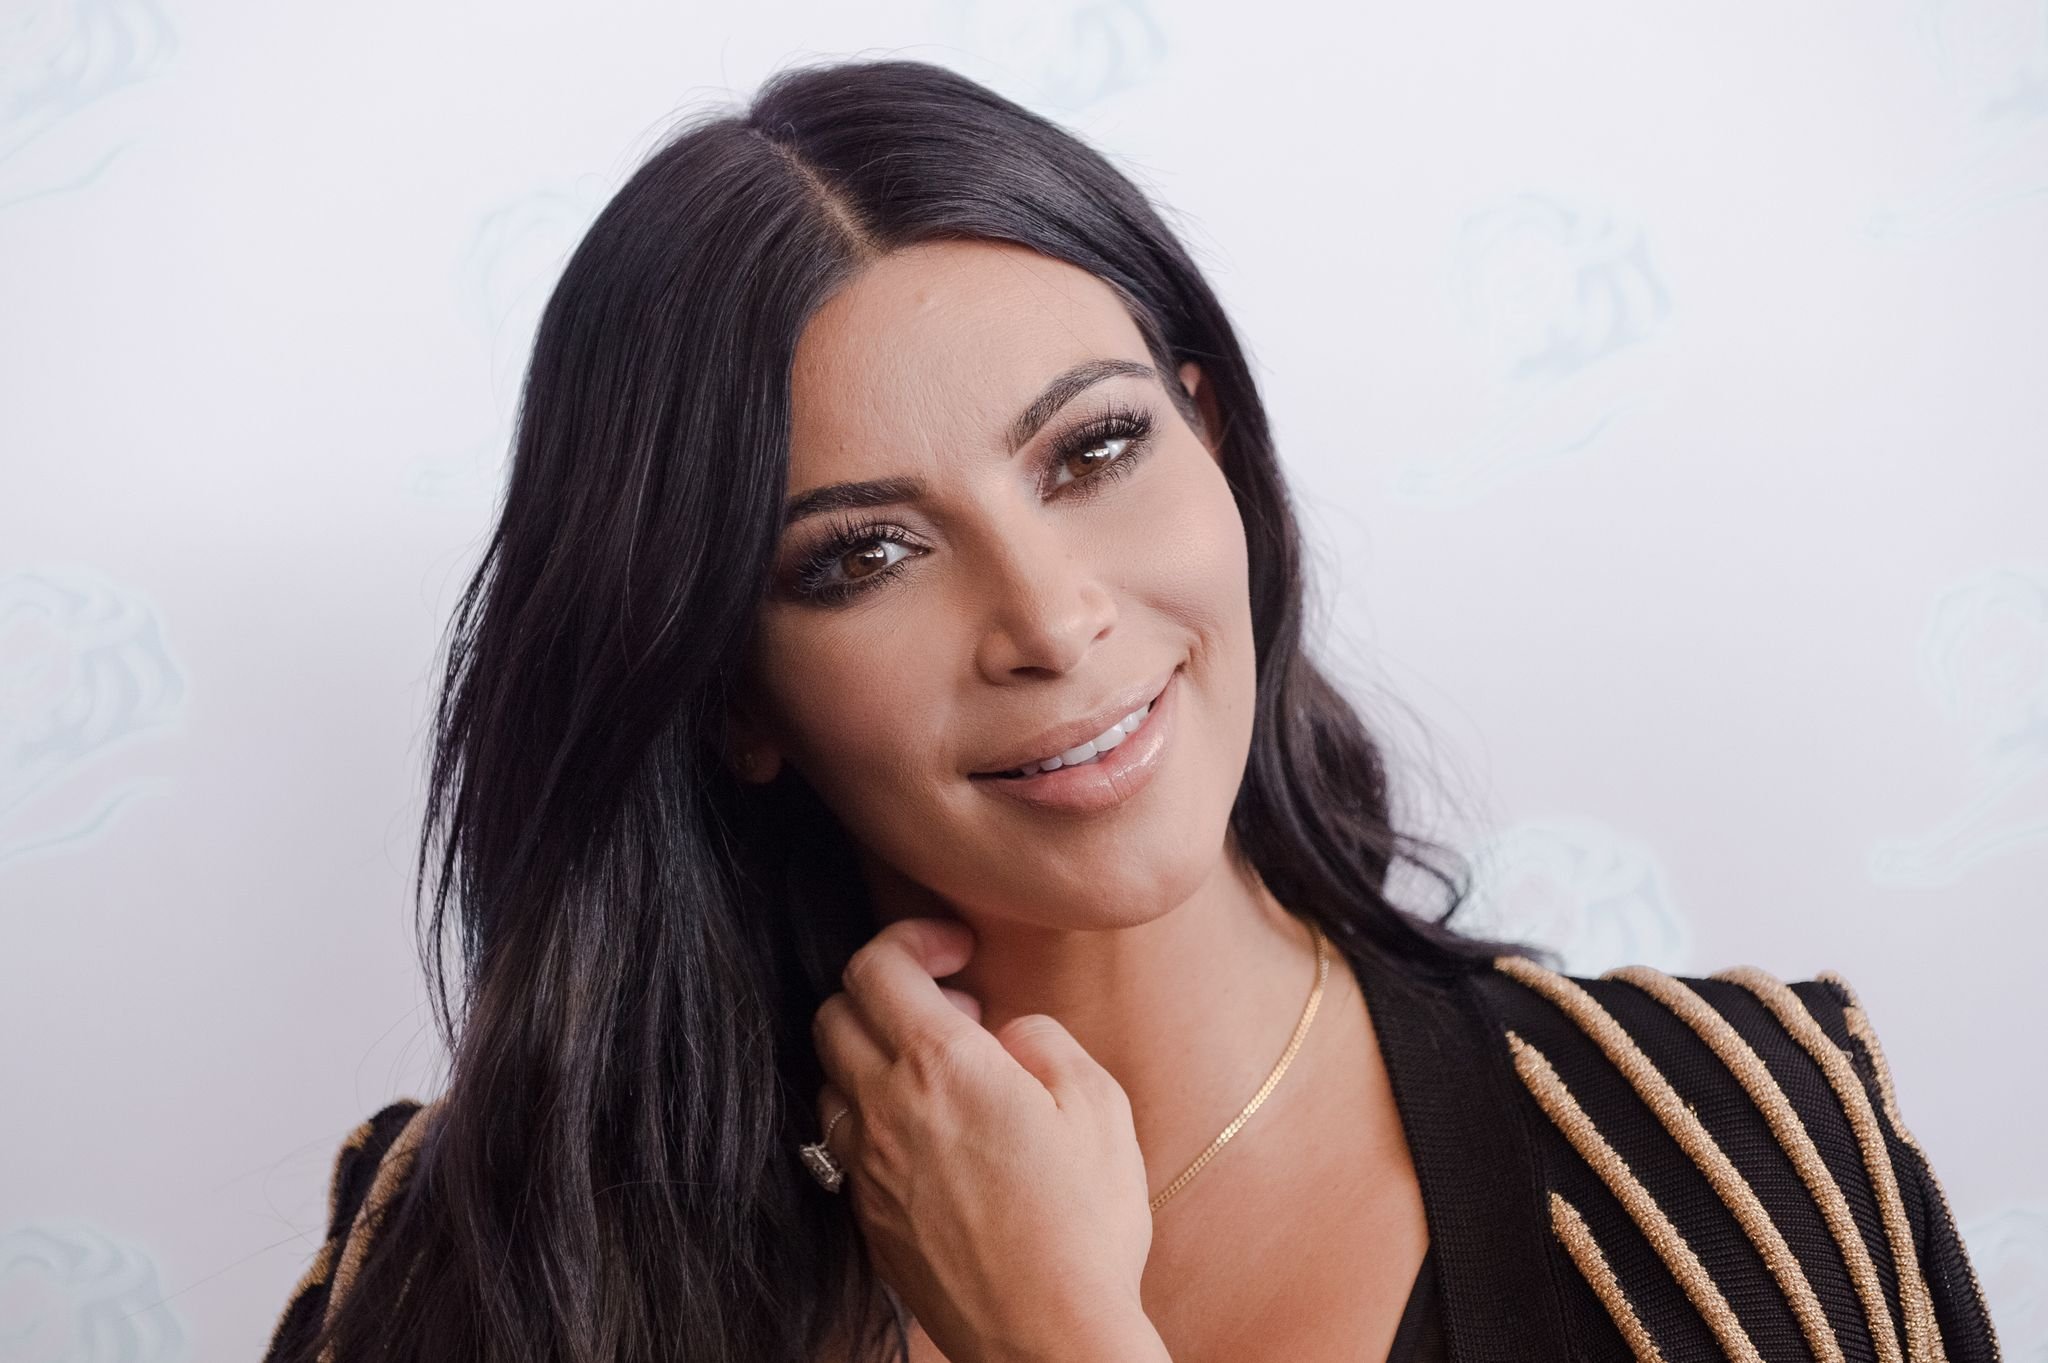 Kim Kardashian attending the Cannes Lions International Festival of Creativity on June 24, 2015 in Cannes, France.  | Photo: Getty Images